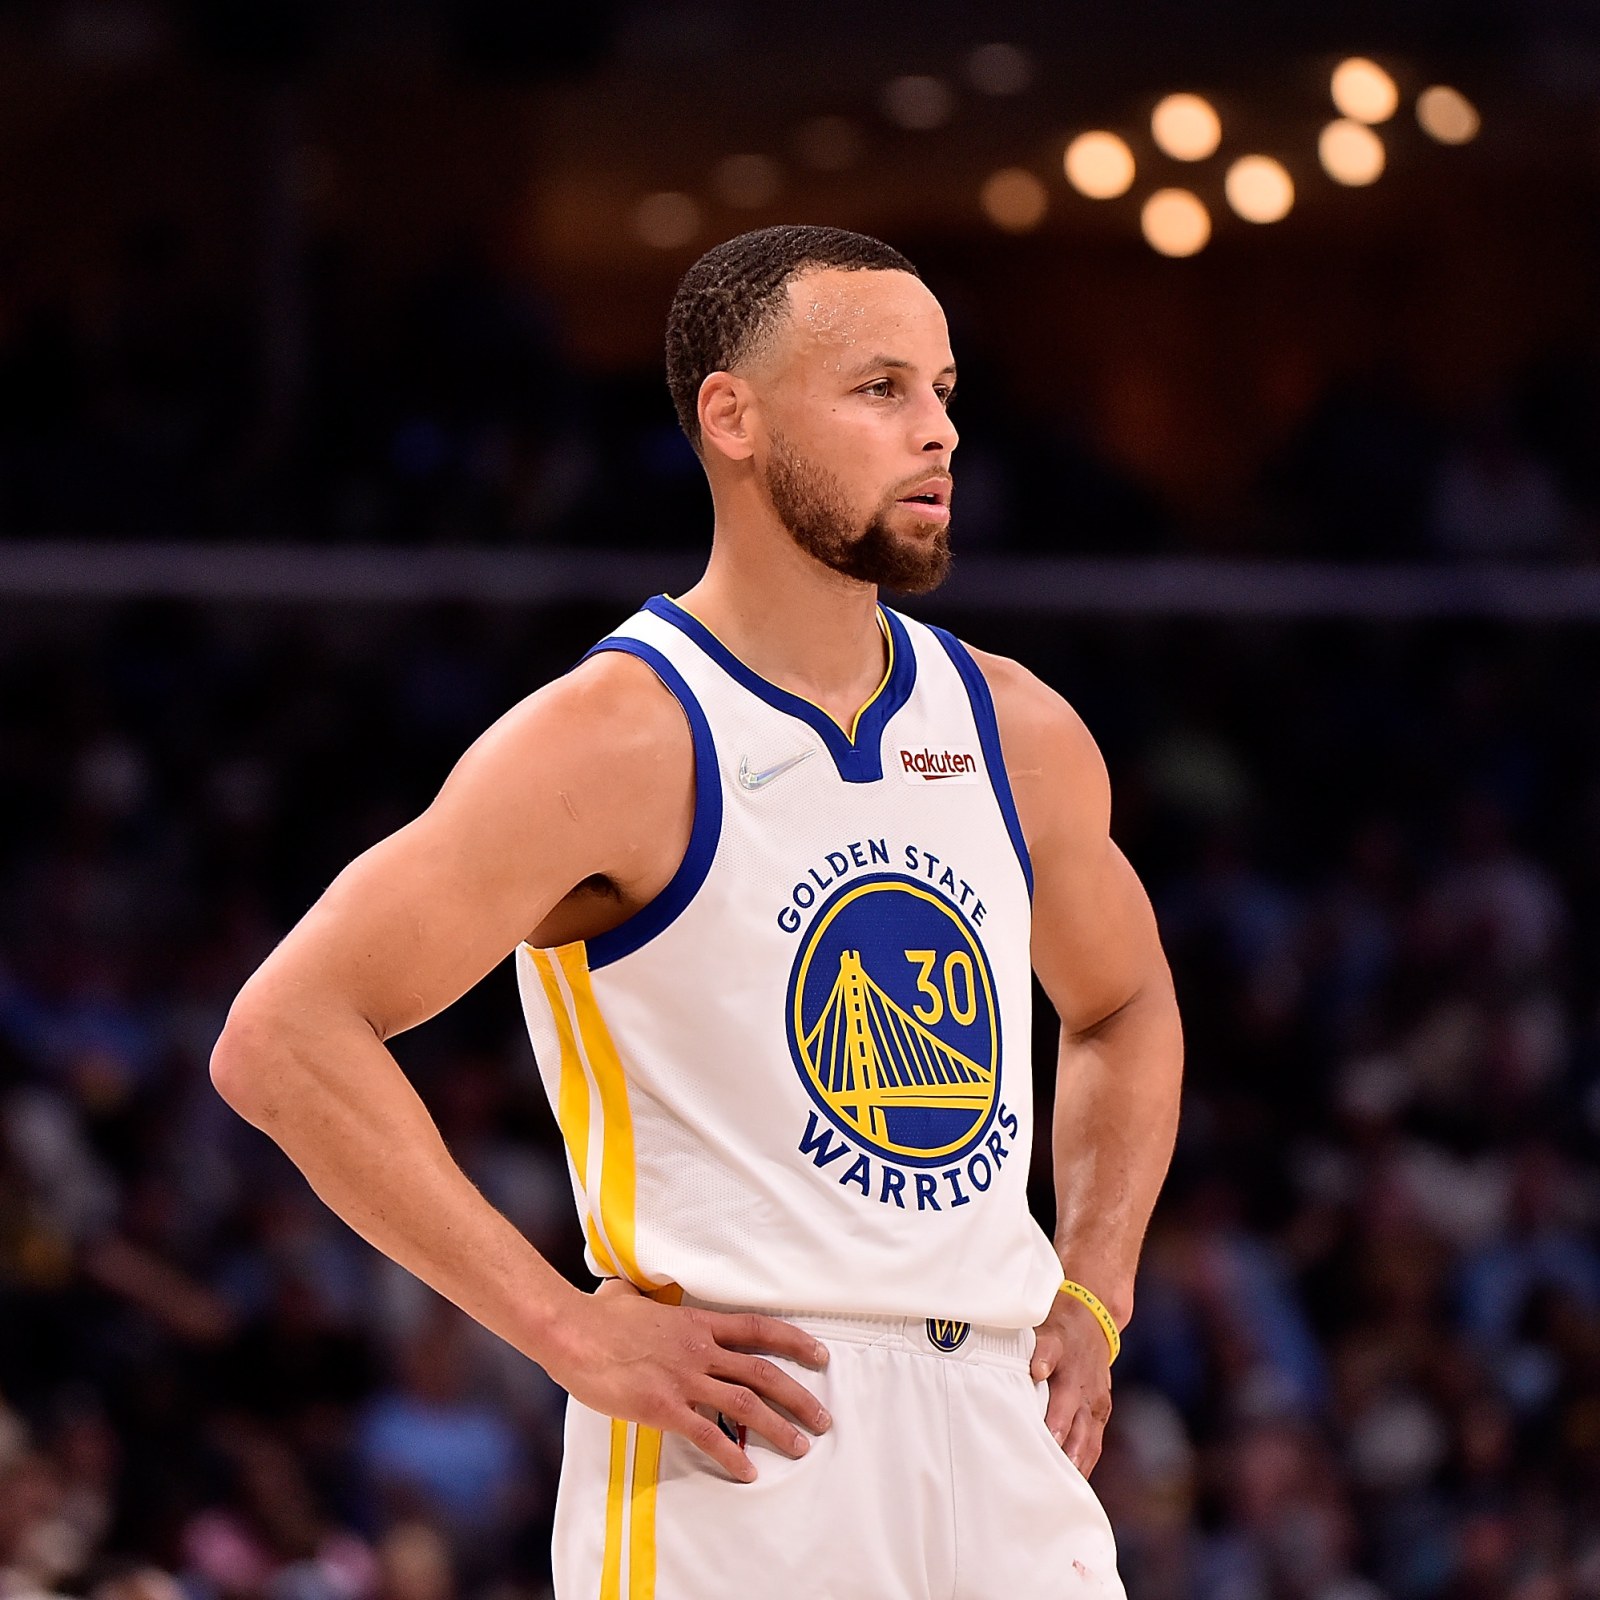 Don't scroll past without saying thank you to Stephen Curry : r